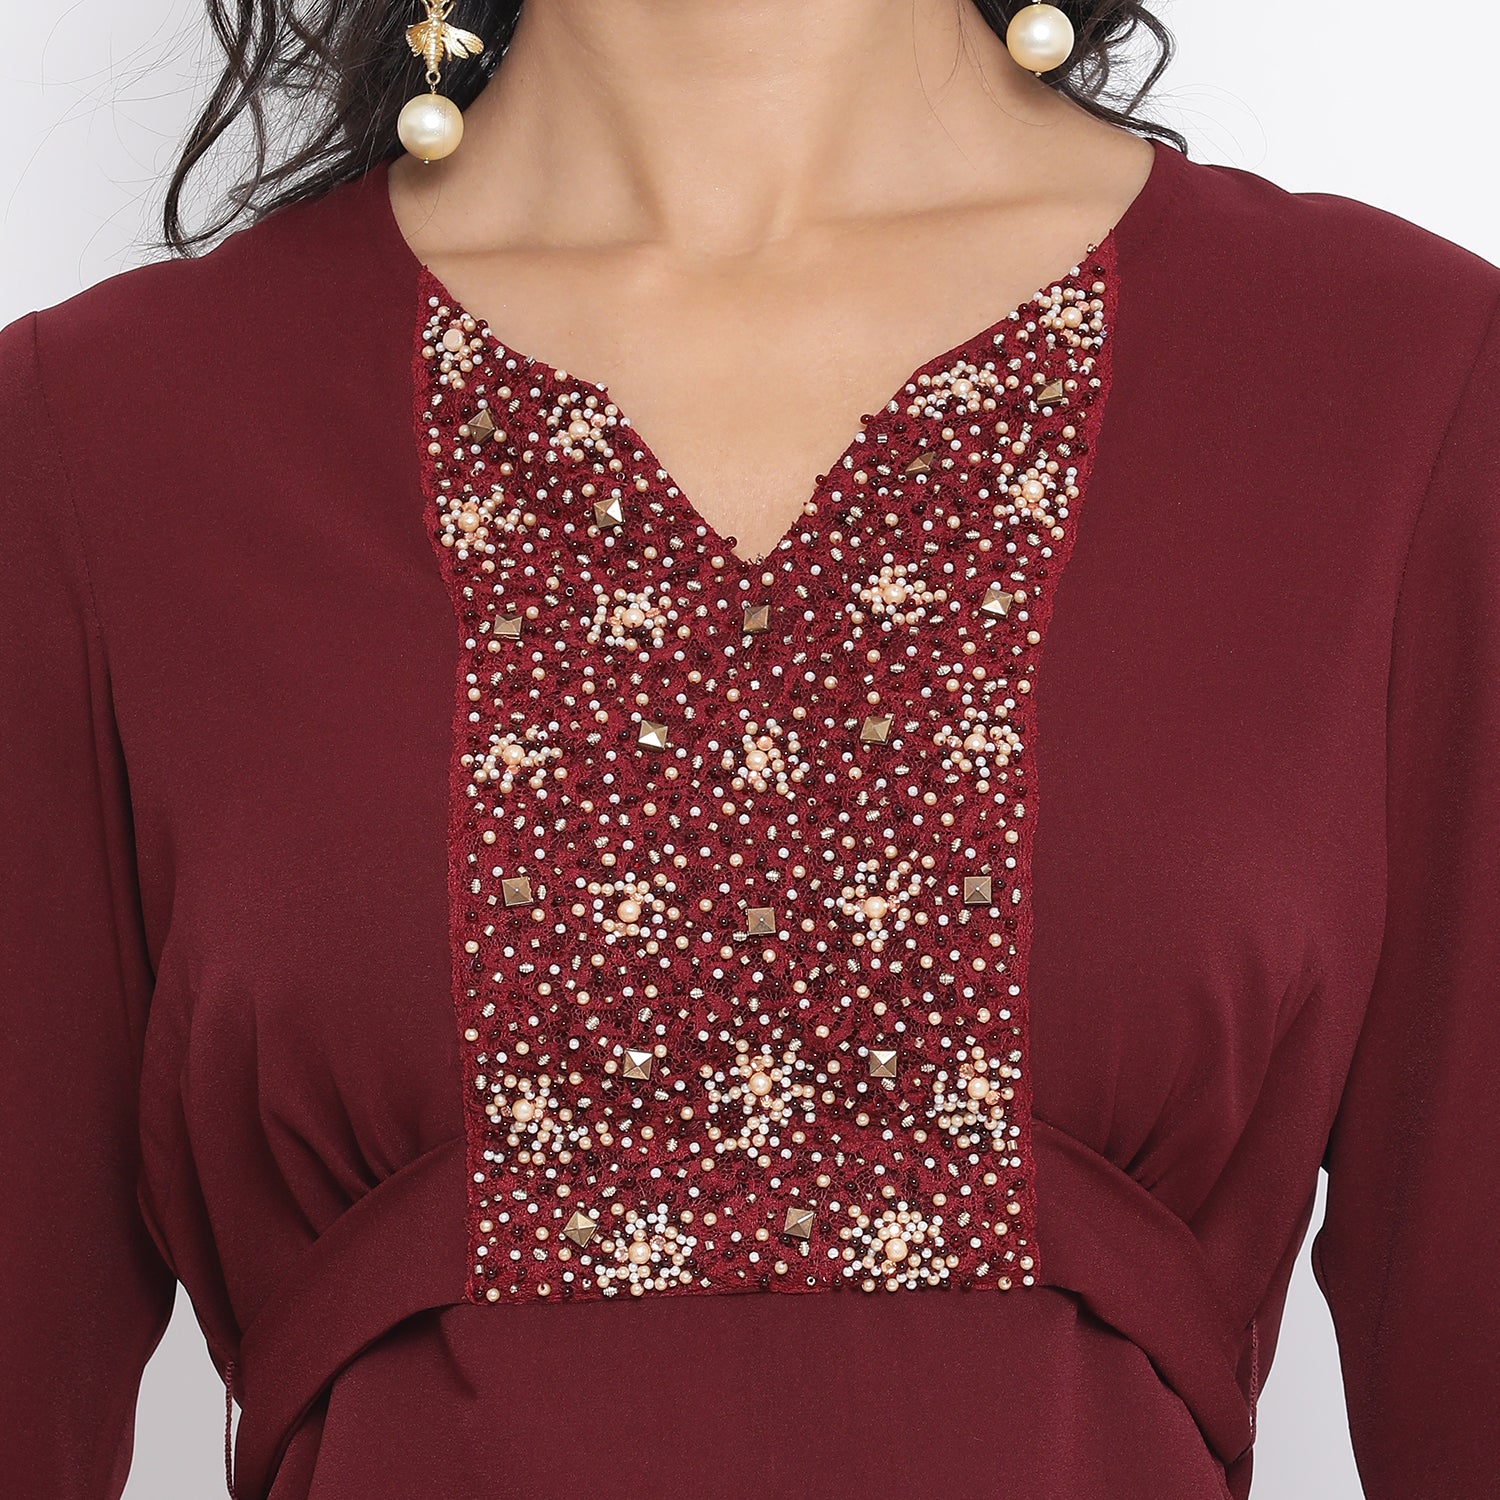 Maroon Top With Emb At Yoke With Back Tie Knot